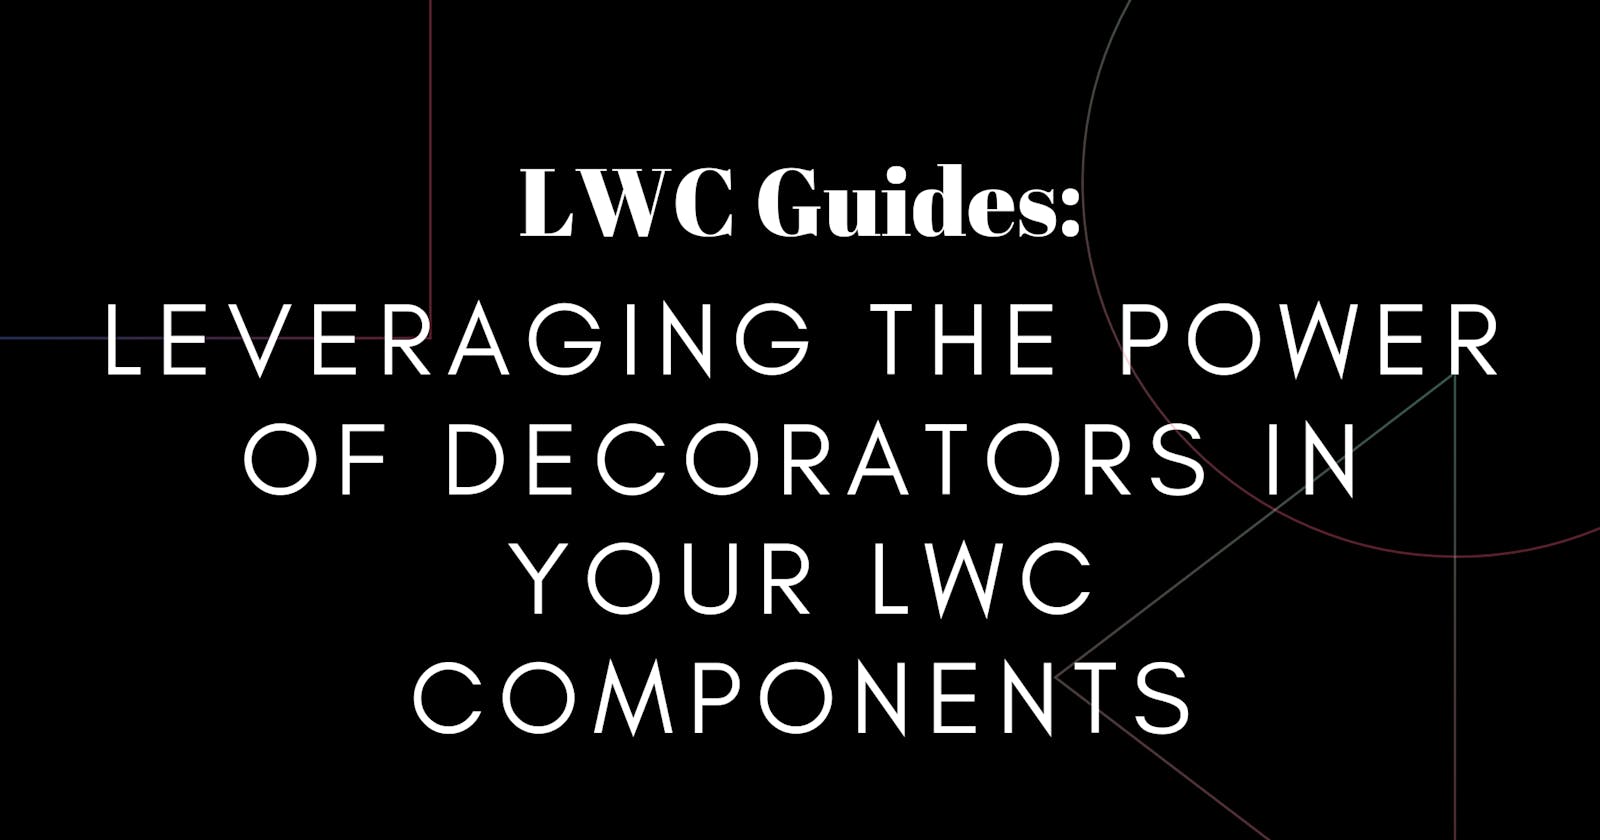 Leveraging the Power of Decorators in Your LWC Components